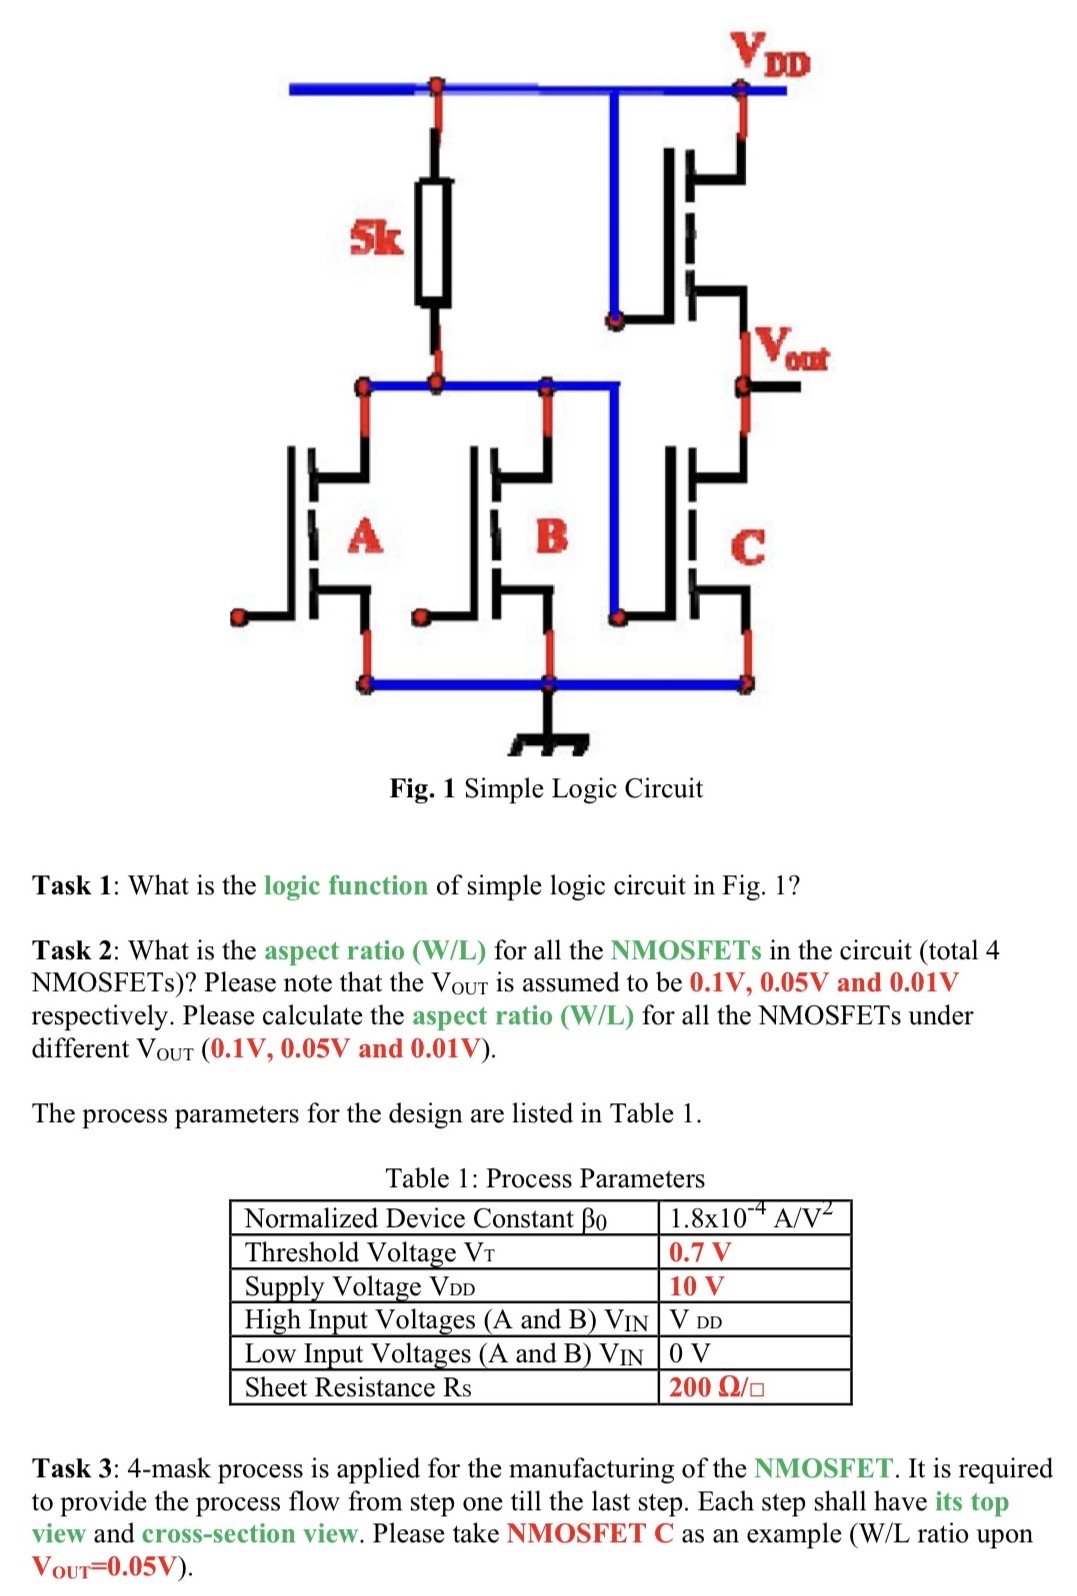 Fig. 1 Simple Logic Circuit Task 1: What is the logic function of simple logic circuit in Fig. 1? Task 2: What is the aspect ratio (W/L) for all the NMOSFETs in the circuit (total 4 NMOSFETs)? Please note that the VOUt is assumed to be 0.1 V, 0.05 V and 0.01 V respectively. Please calculate the aspect ratio (W/L) for all the NMOSFETs under different VOUT (0.1 V, 0.05 V and 0.01 V). The process parameters for the design are listed in Table 1. Table 1: Process Parameters Task 3: 4-mask process is applied for the manufacturing of the NMOSFET. It is required to provide the process flow from step one till the last step. Each step shall have its top view and cross-section view. Please take NMOSFET C as an example (W/L ratio upon VOUT = 0.05 V). 